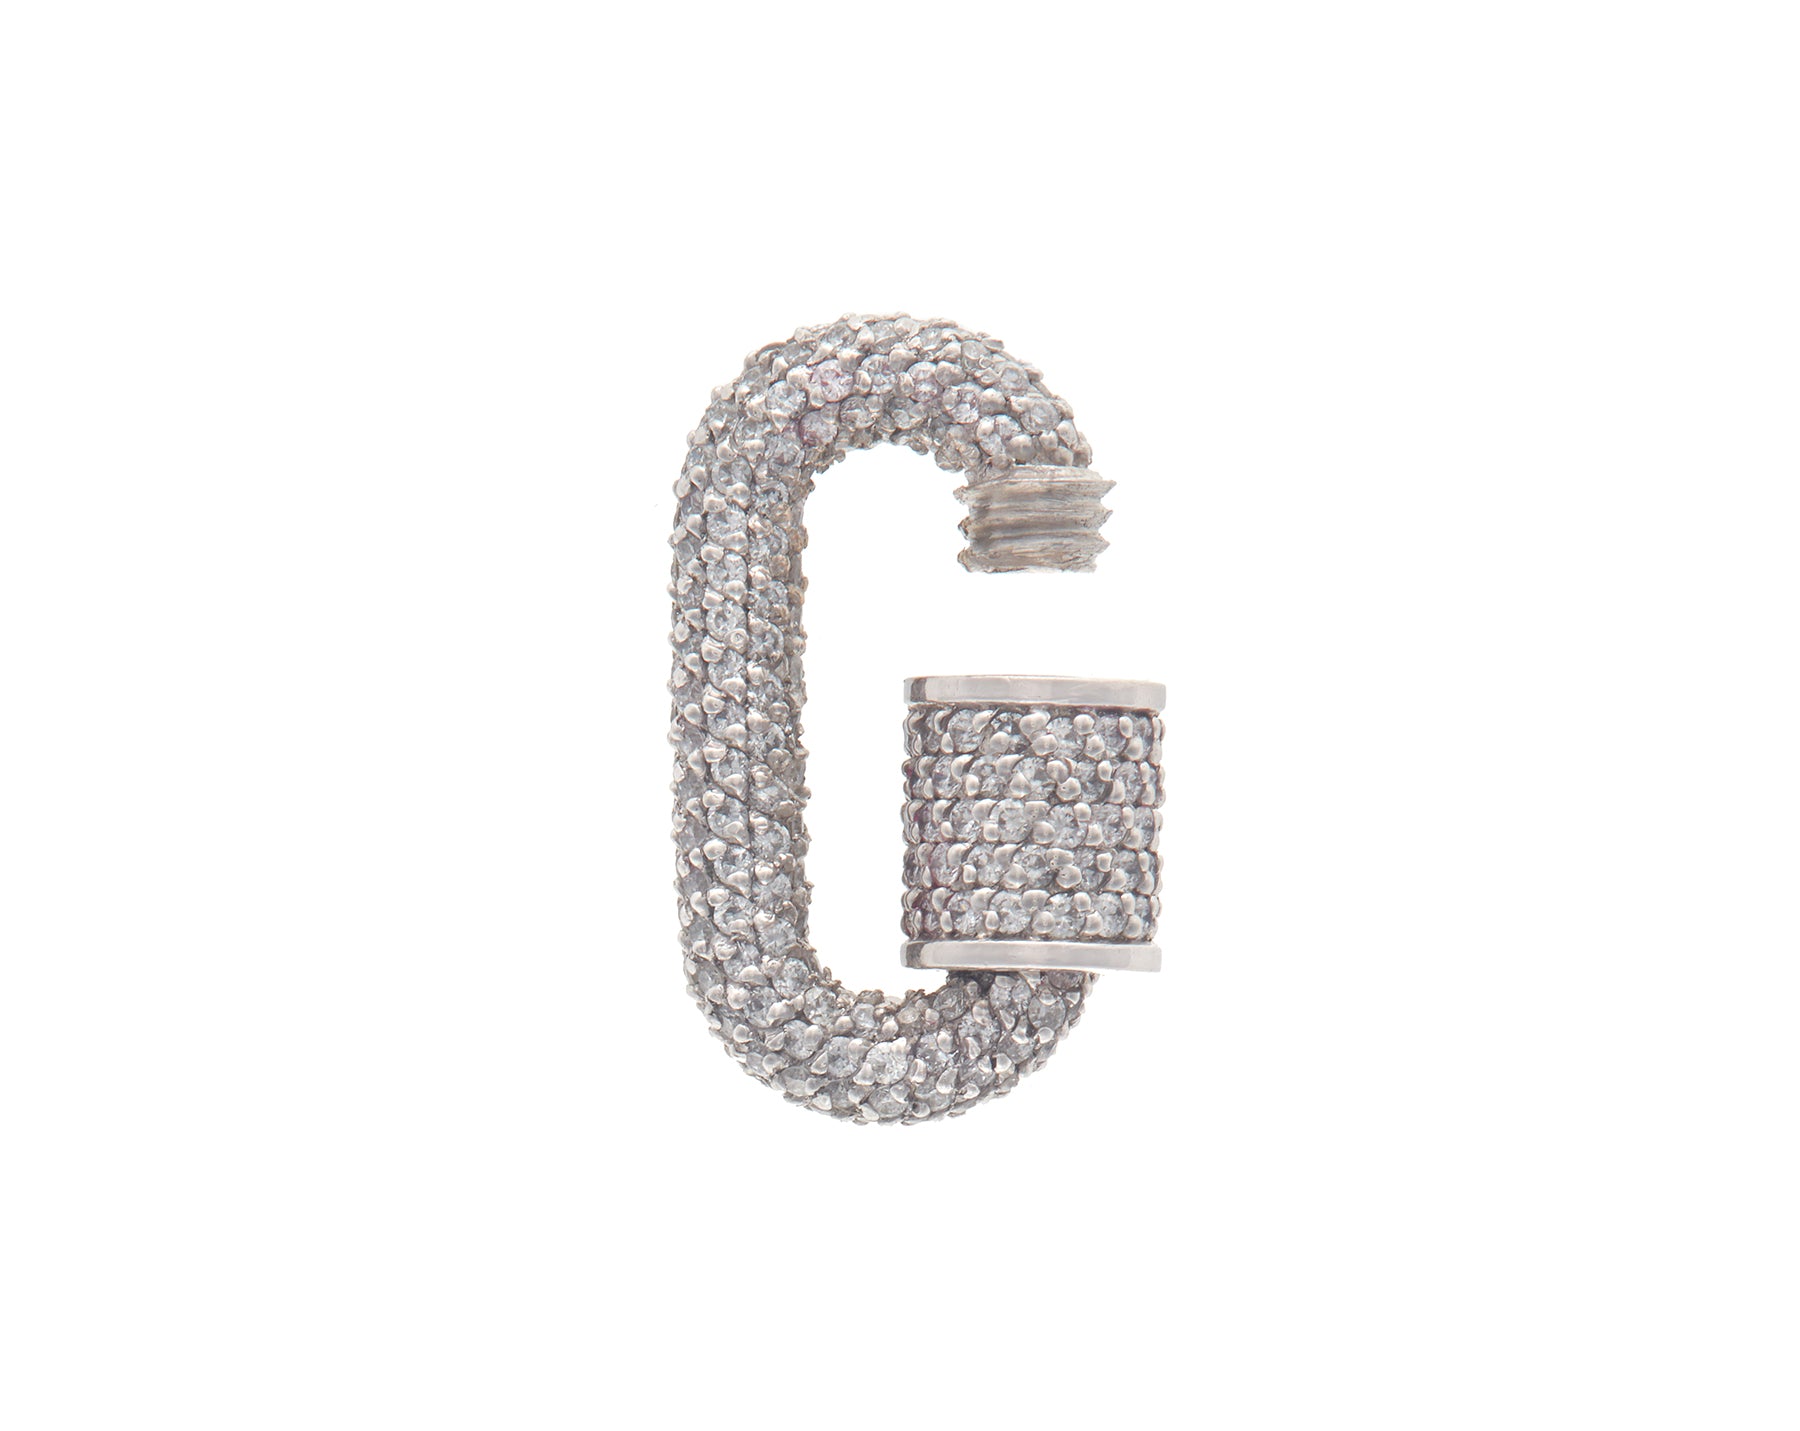 Silver diamond studded lock with open clasp